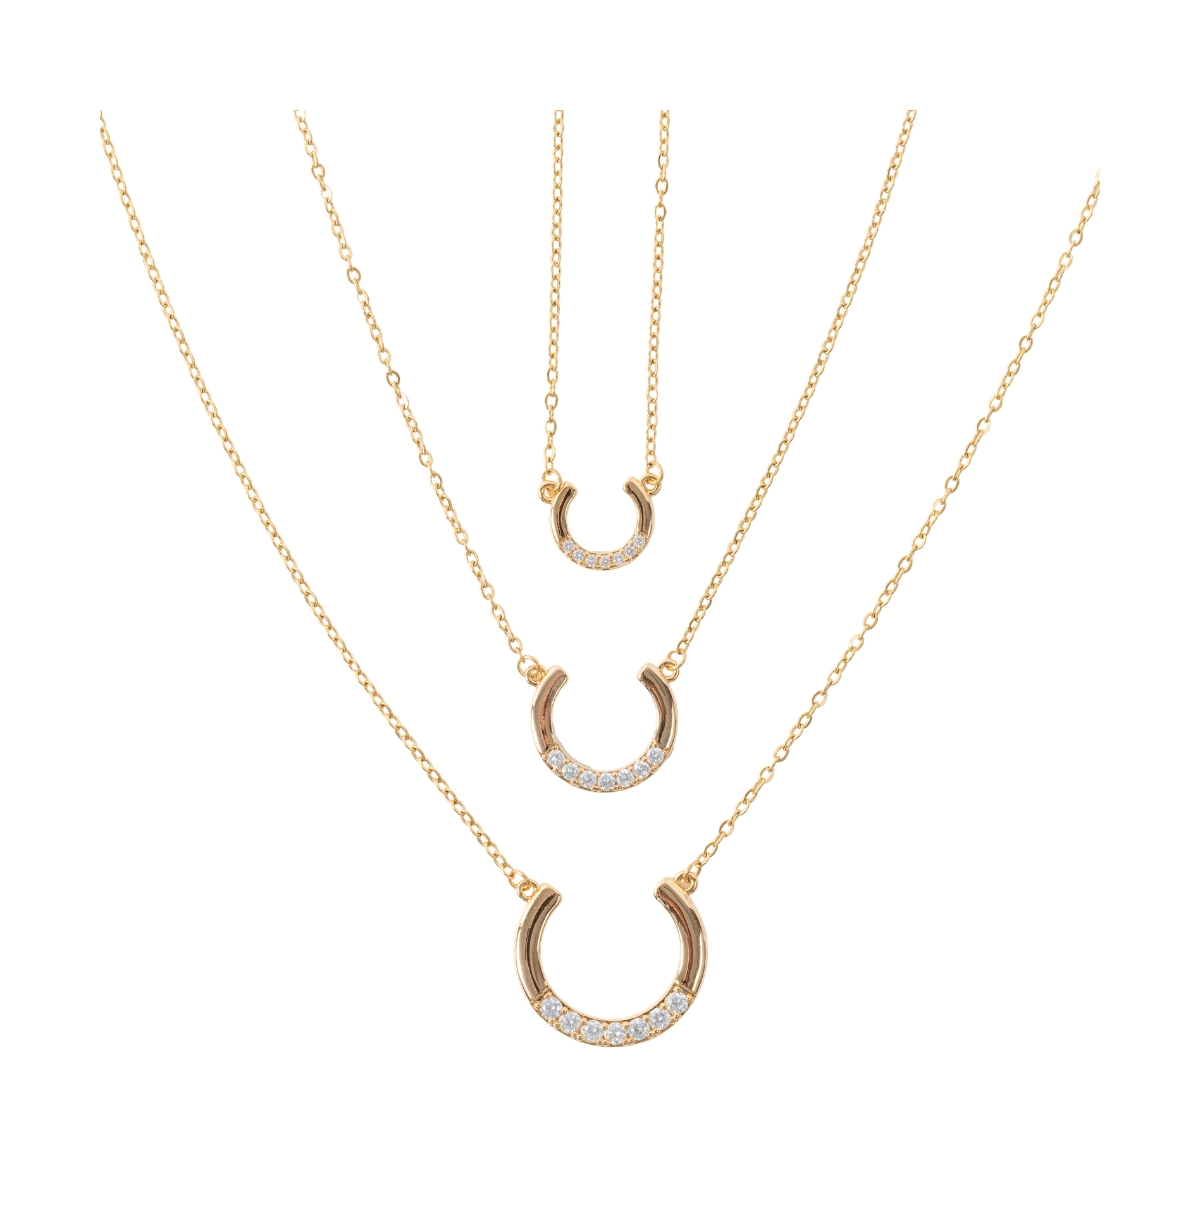 316L Slayer Gold-Tone Crystal Horseshoe Necklace Trio - Gold filled stainless steel